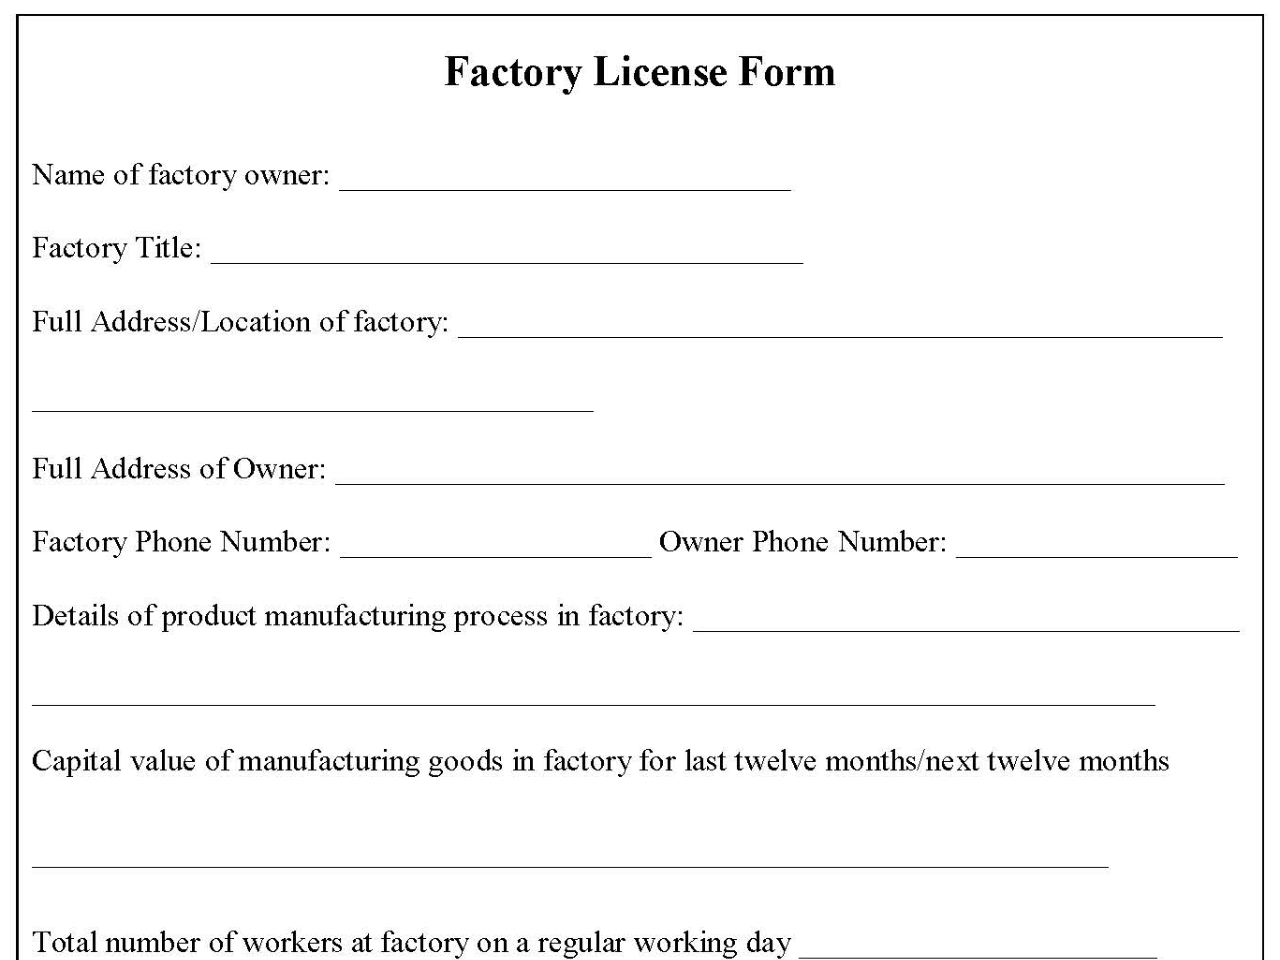 Factory License Form